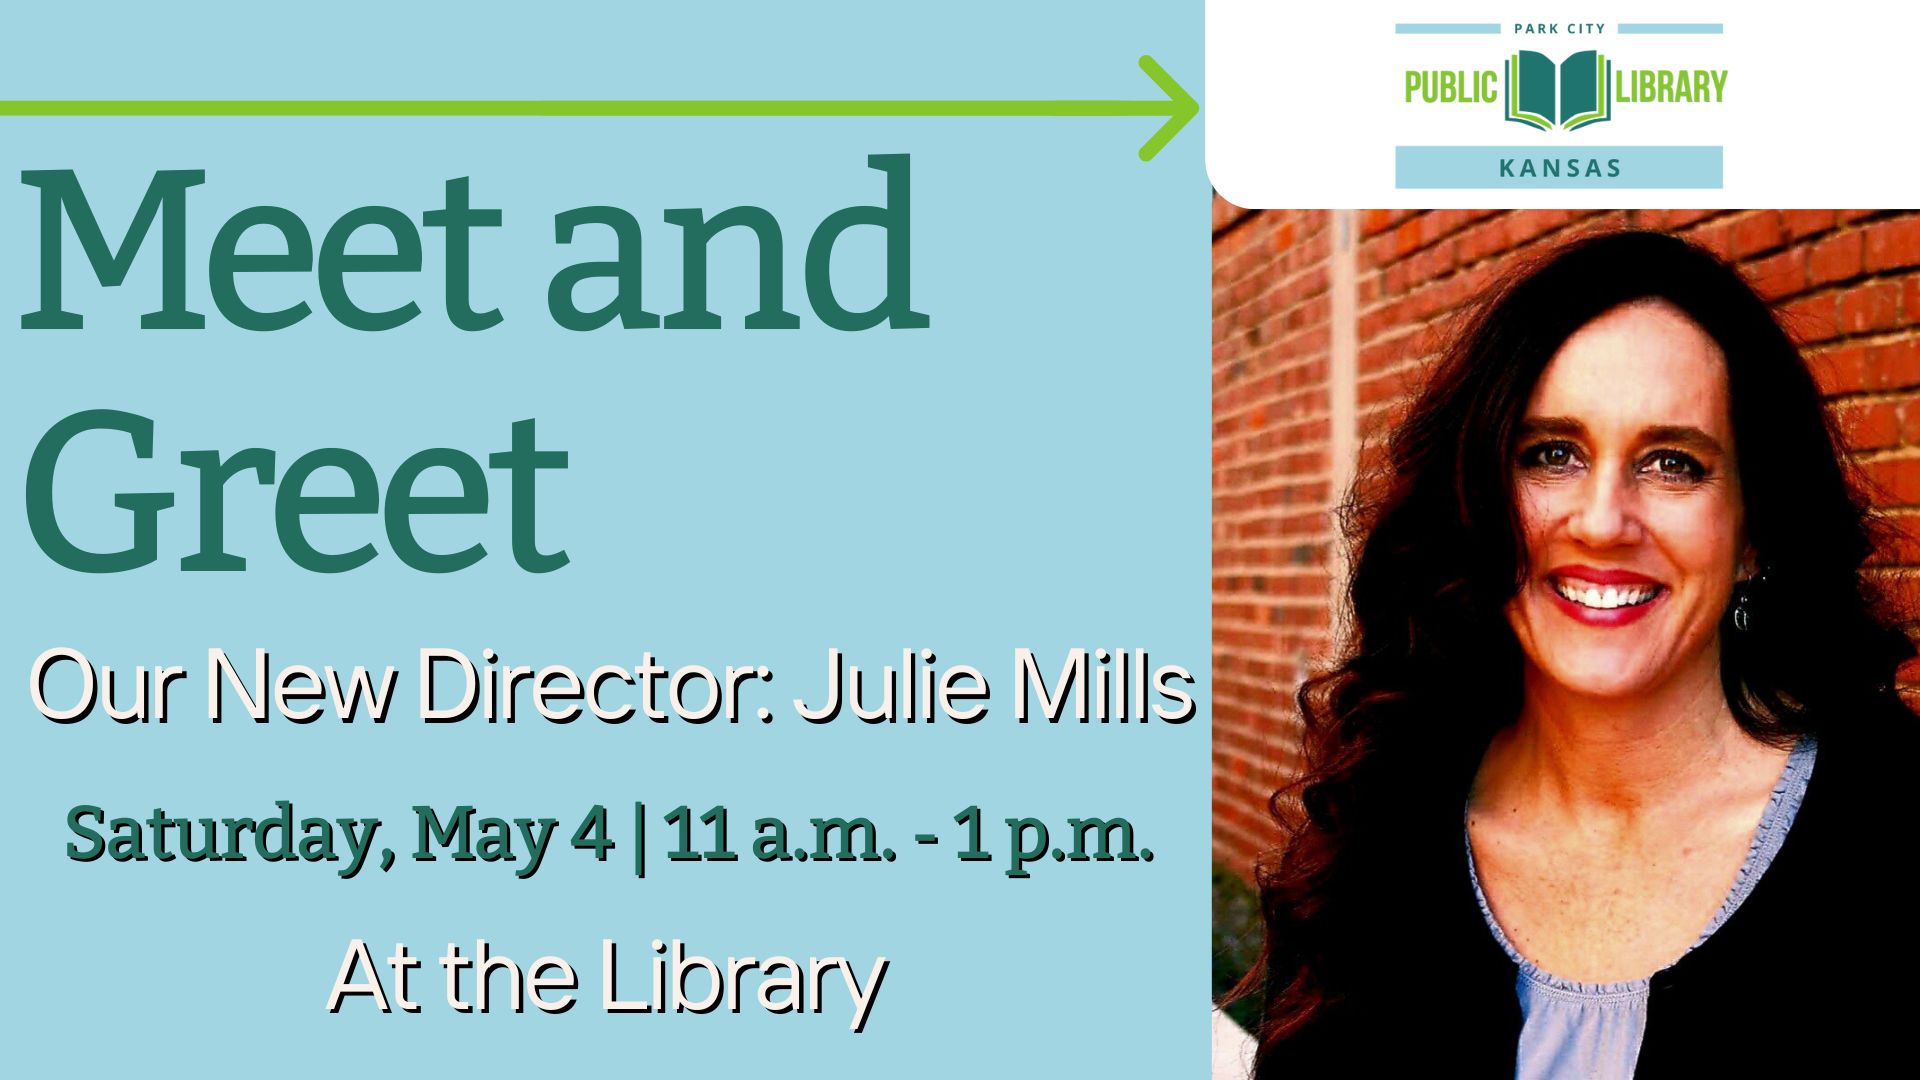 Our New Director: Julie Mills